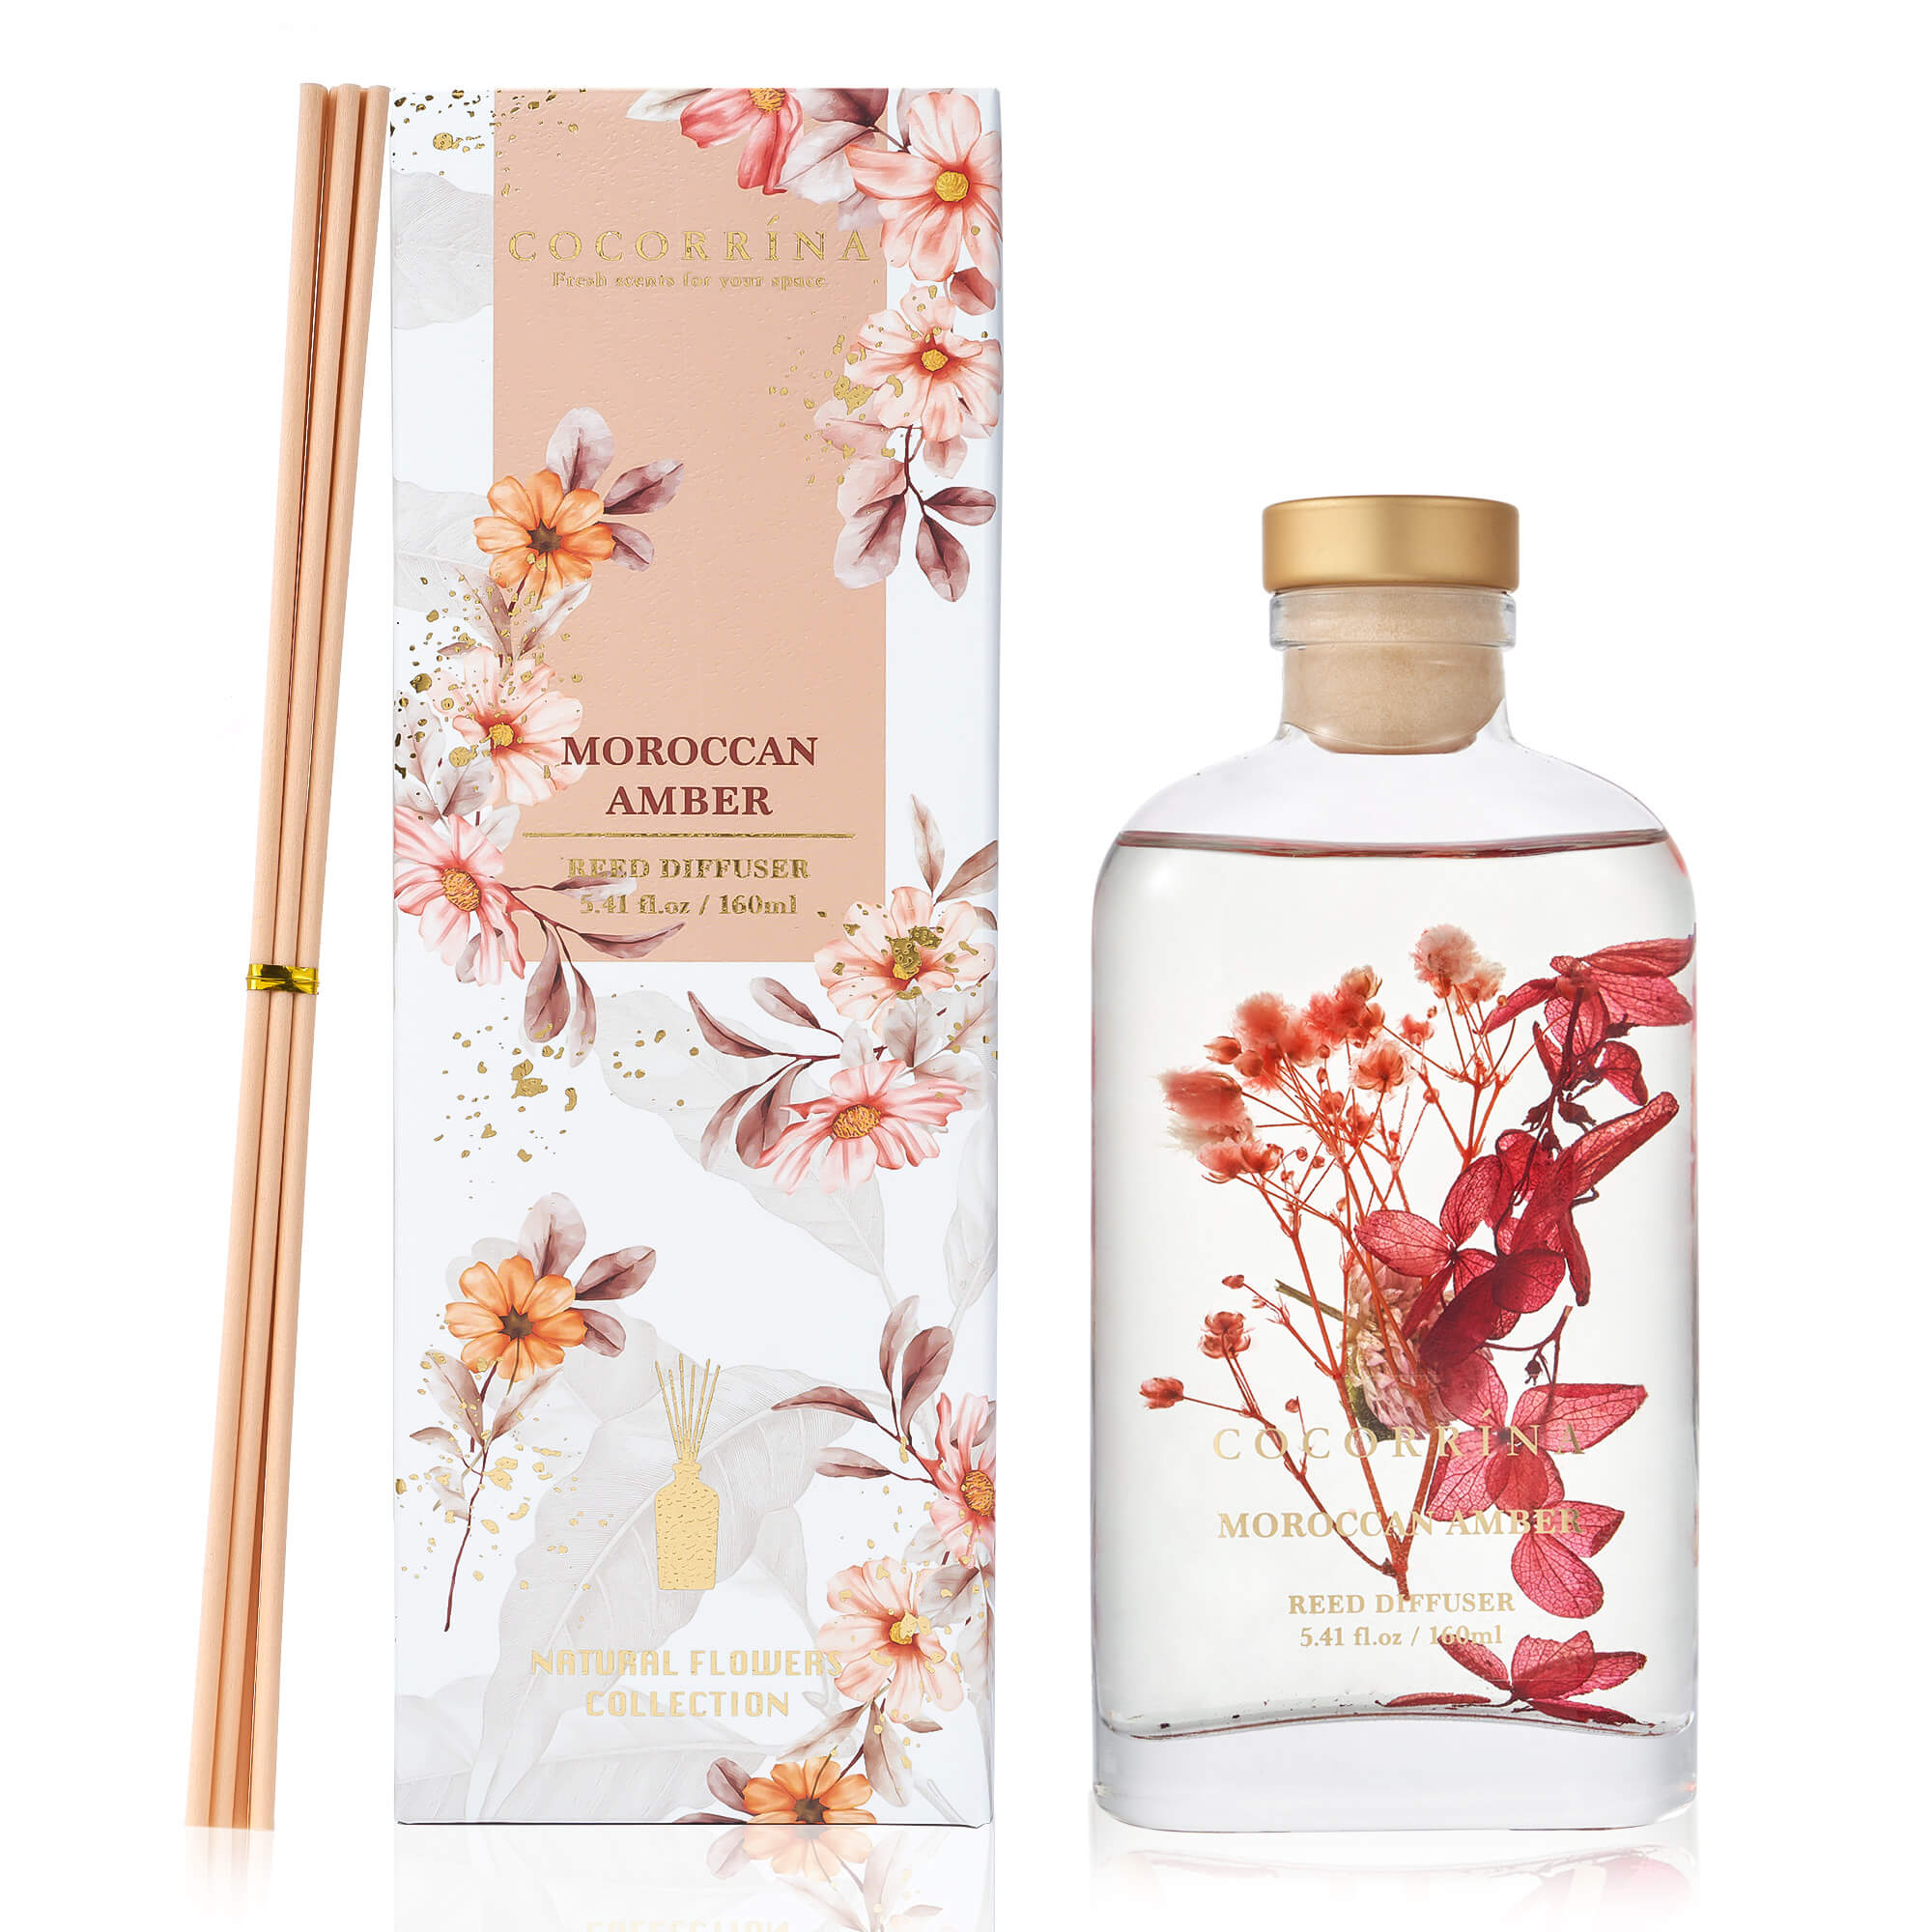 COCORRÍNA Moroccan Amber Scented Blooms Series Reed Diffuser Set